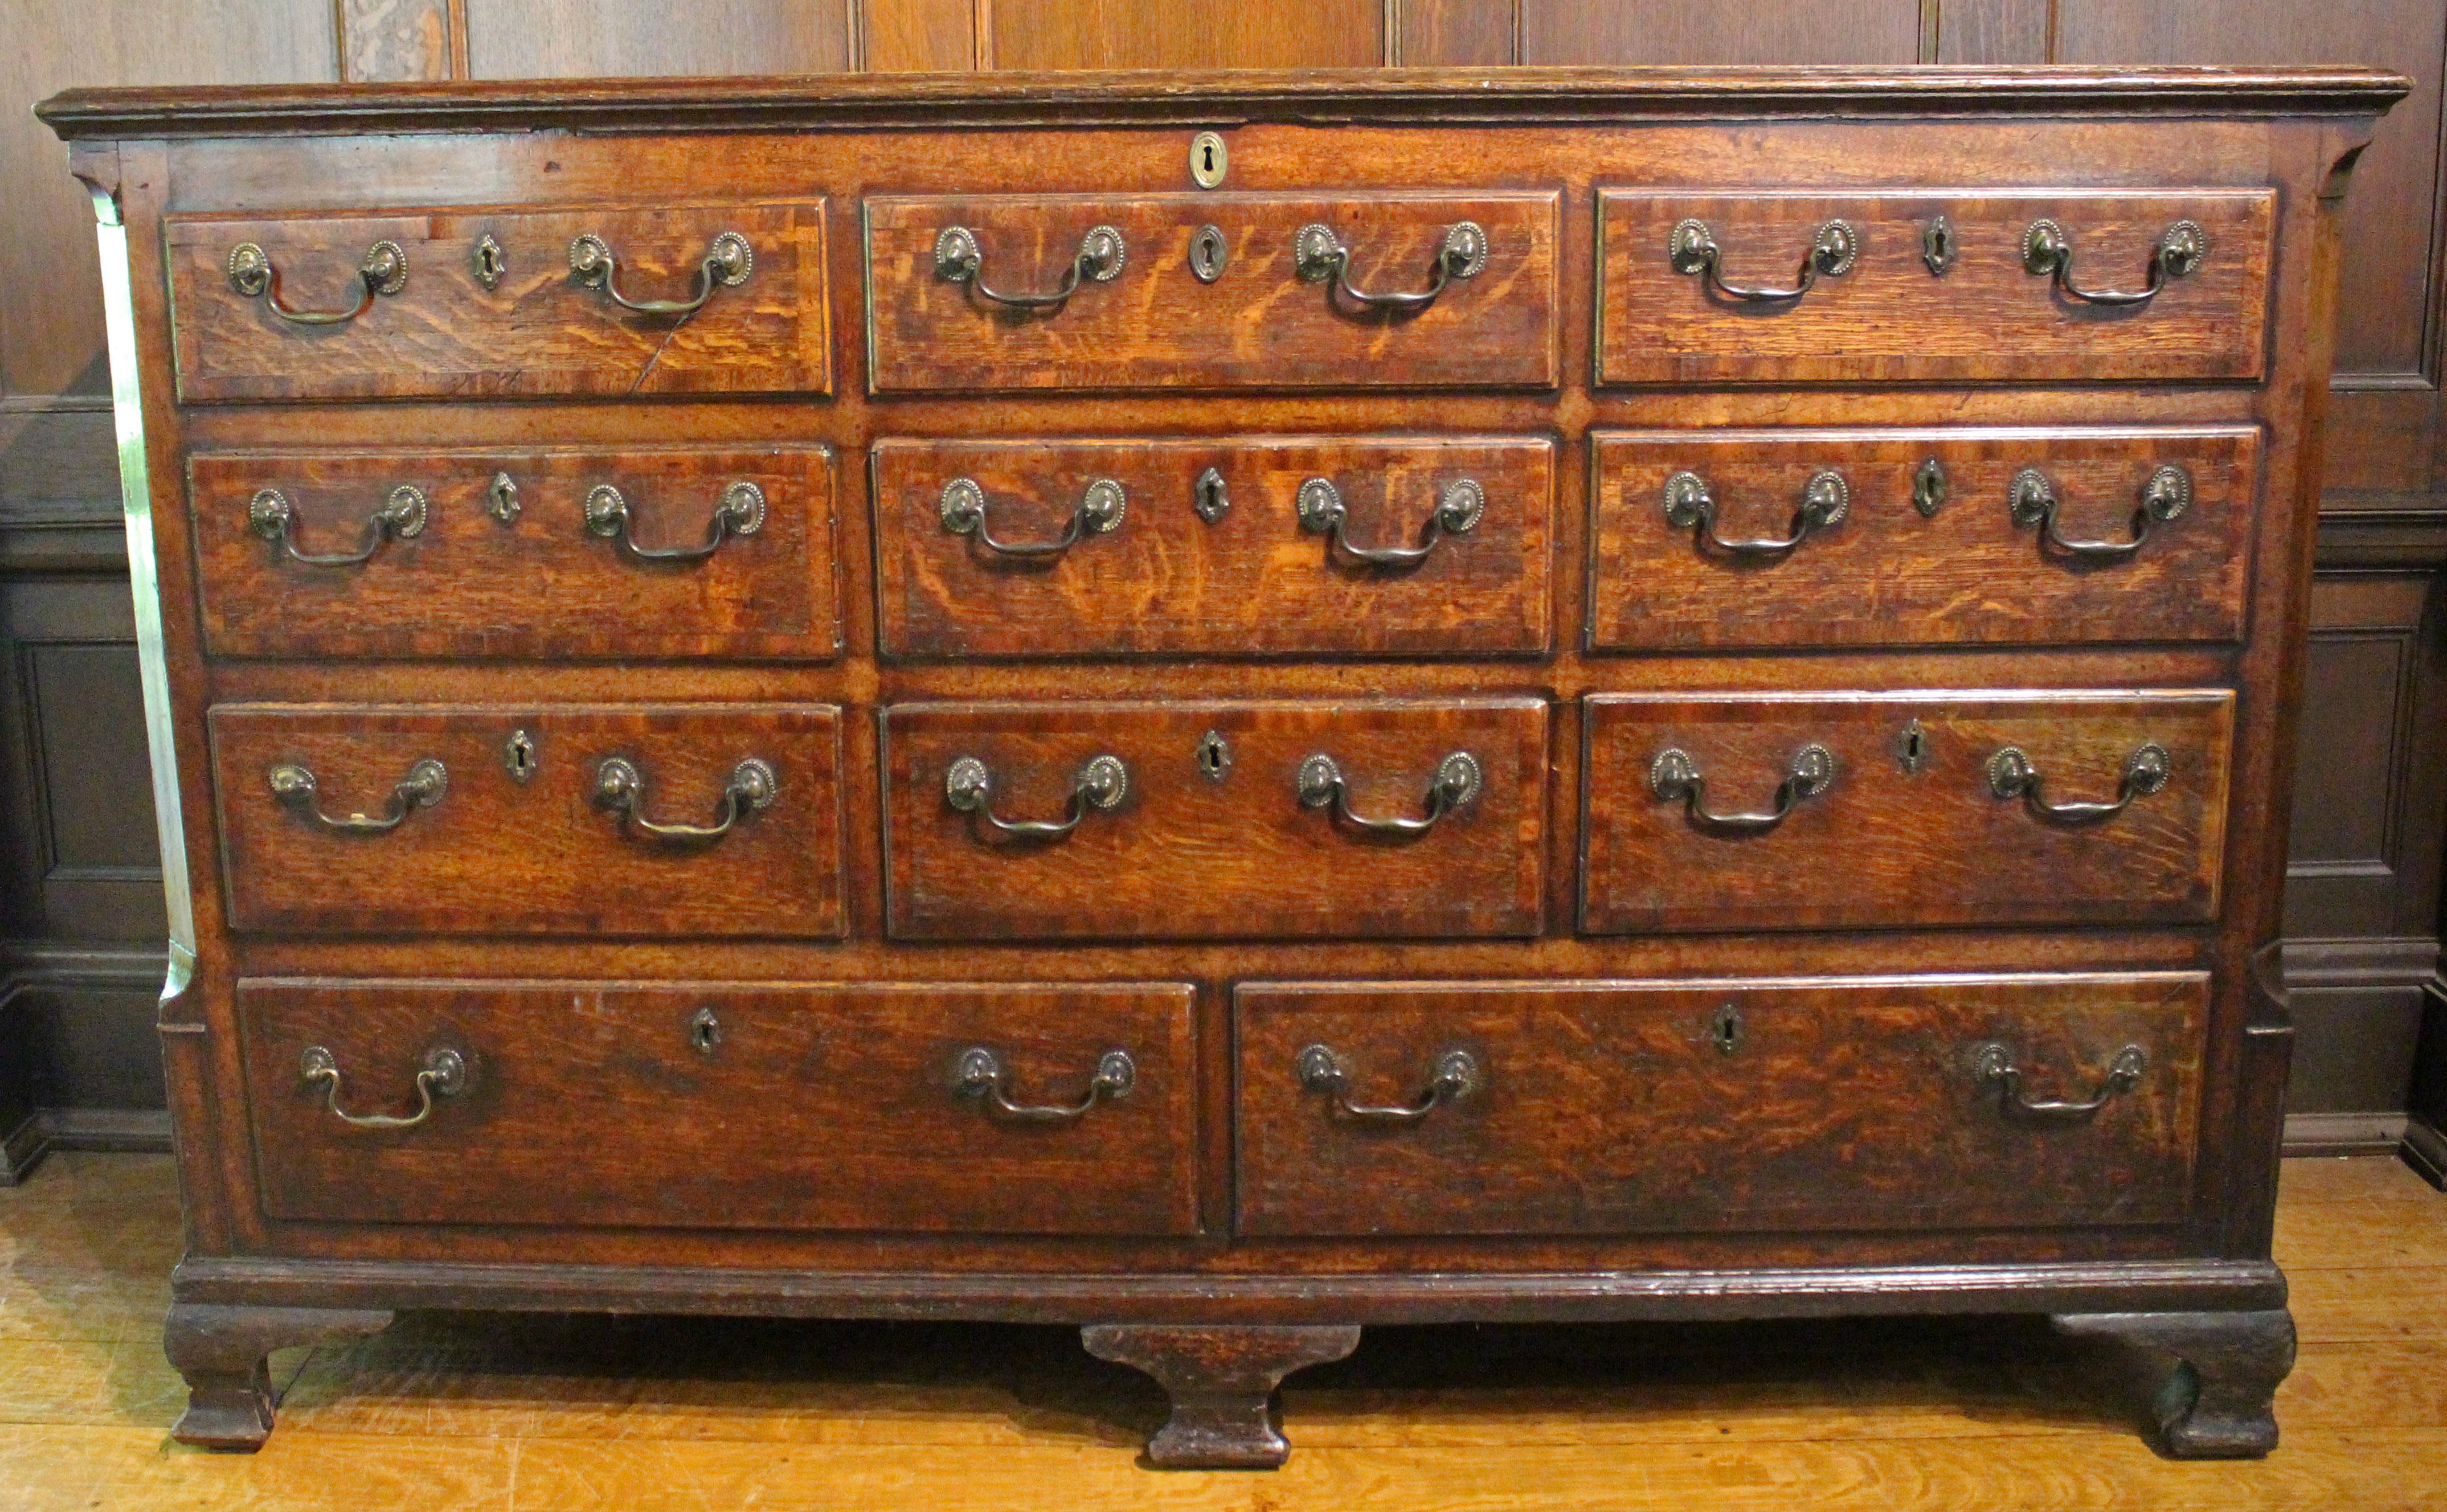 Lancashire mule chest, English. Bail & rosette pulls (mostly original, a few handles appropriately replaced over the years). Molded top. Shaped canted corners. A rank of 3 over 3 faux drawers for the lift-top storage, over 3 working drawers, over 2